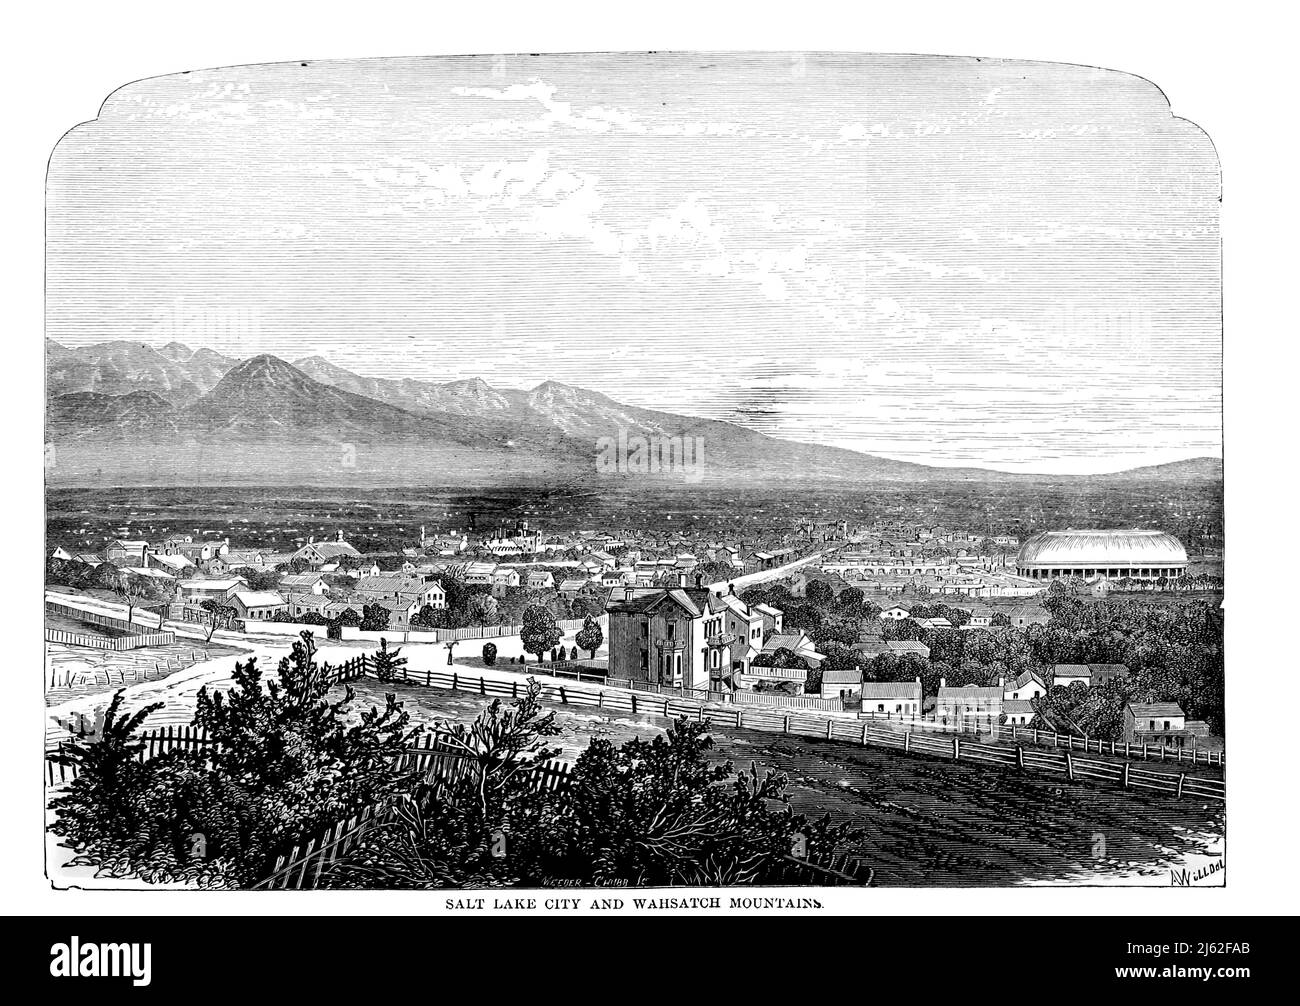 Salt Lake City and Wahsatch Mountains from the book The Pacific tourist : Adams & Bishop's illustrated trans-continental guide of travel, from the Atlantic to the Pacific Ocean : containing full descriptions of railroad routes across the continent, all pleasure resorts and places of most noted scenery in the Far West, also of all cities, towns, villages, U.S. forts, springs, lakes, mountains, routes of summer travel, best localities for hunting, fishing, sporting, and enjoyment, with all needful information for the pleasure traveler, miner, settler, or business man : a complete traveler's guid Stock Photo